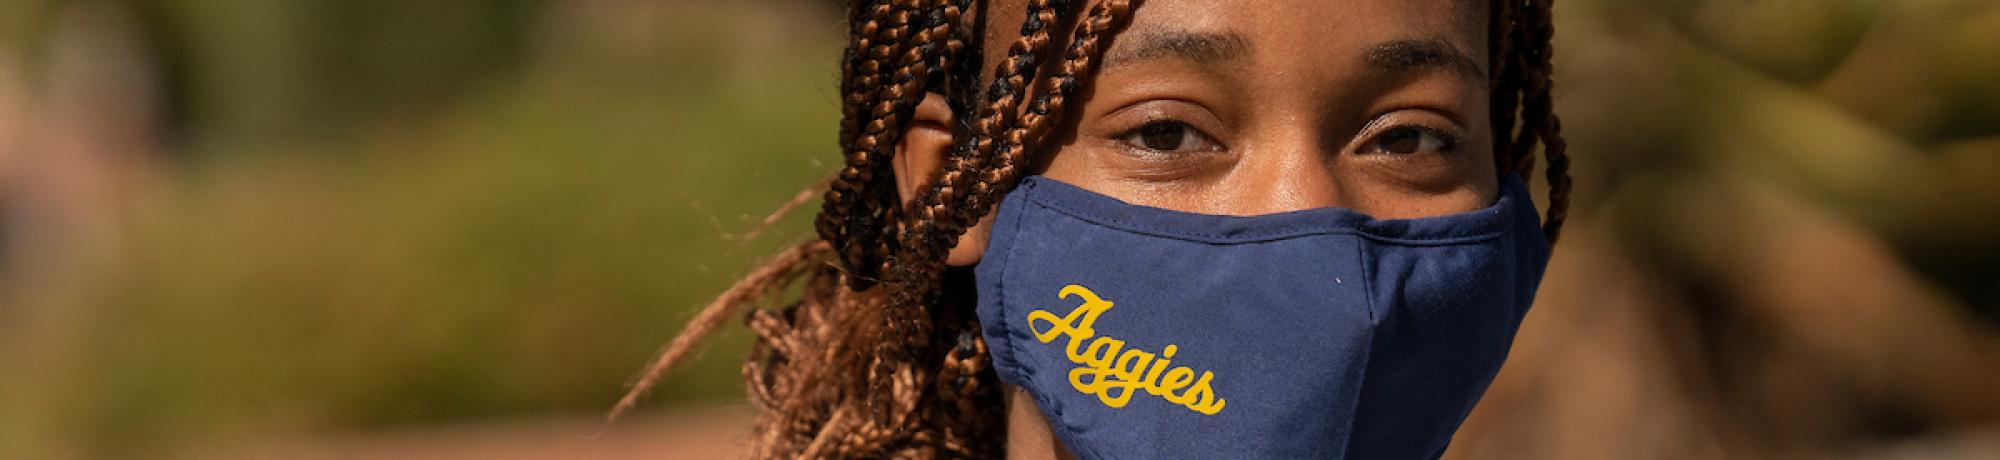 Student wearing Aggies-branded facemask